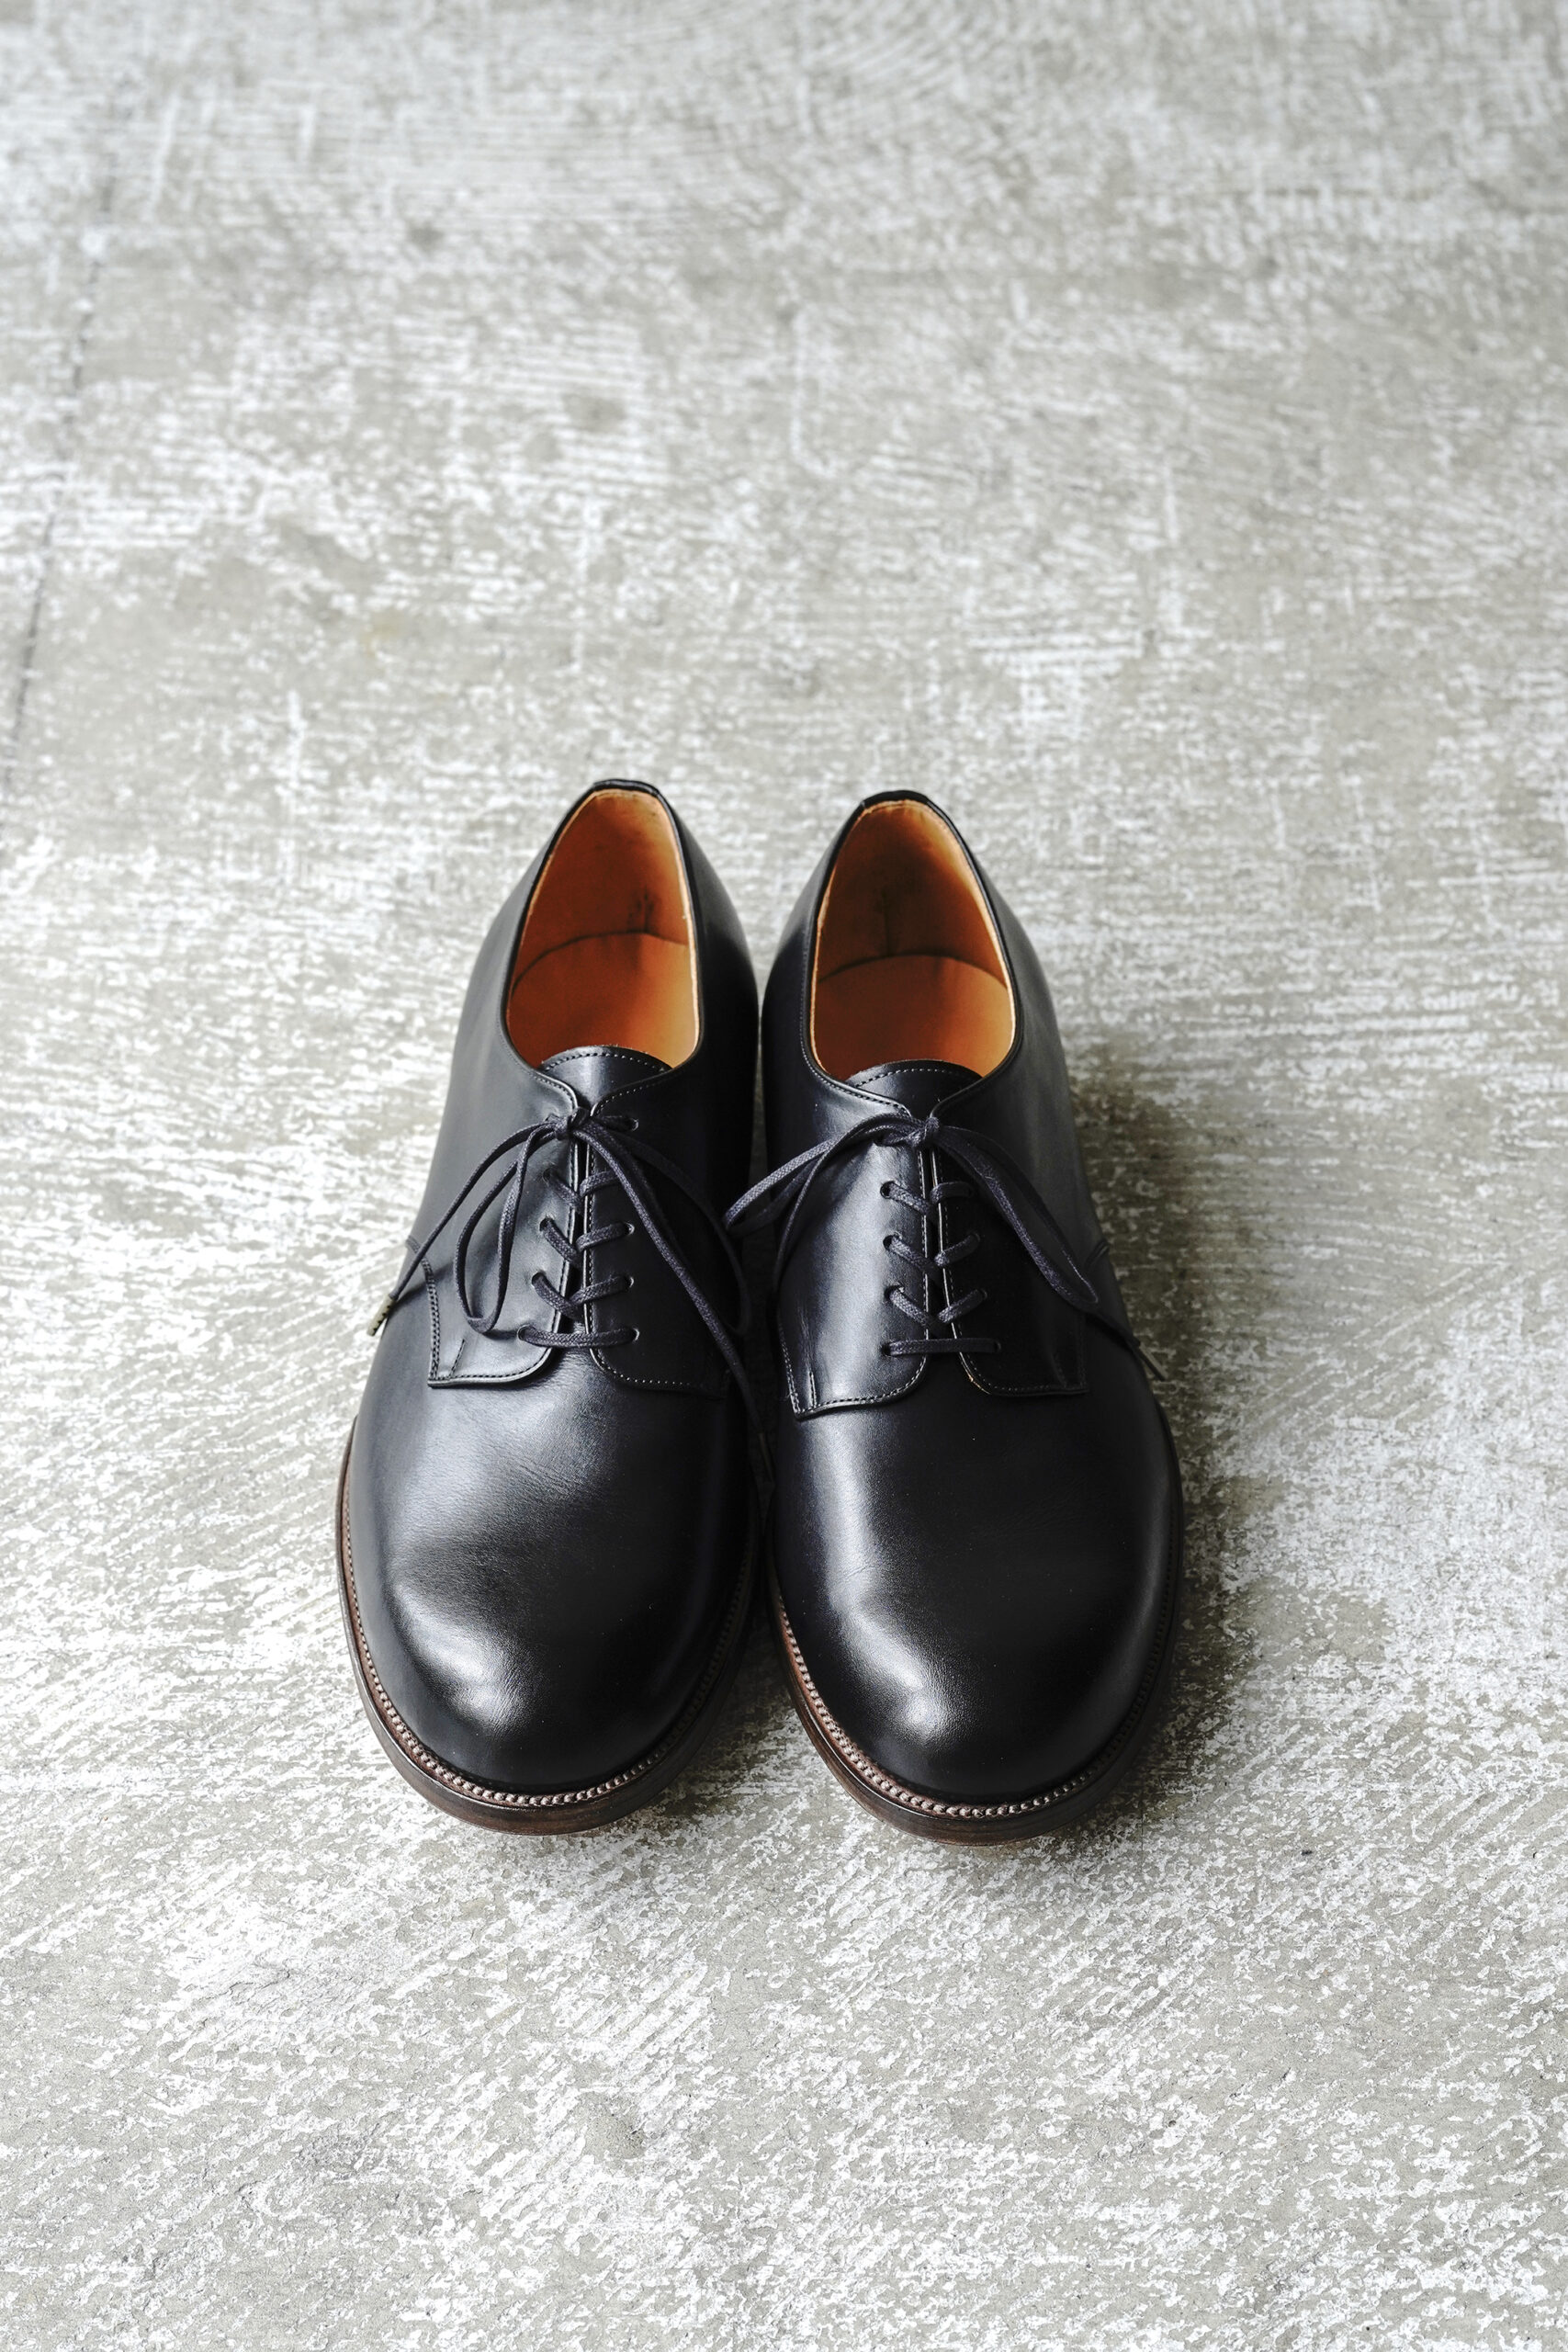 Blucher plain toe 5 hole goodyearwelted | ANOTHER LOUNGE